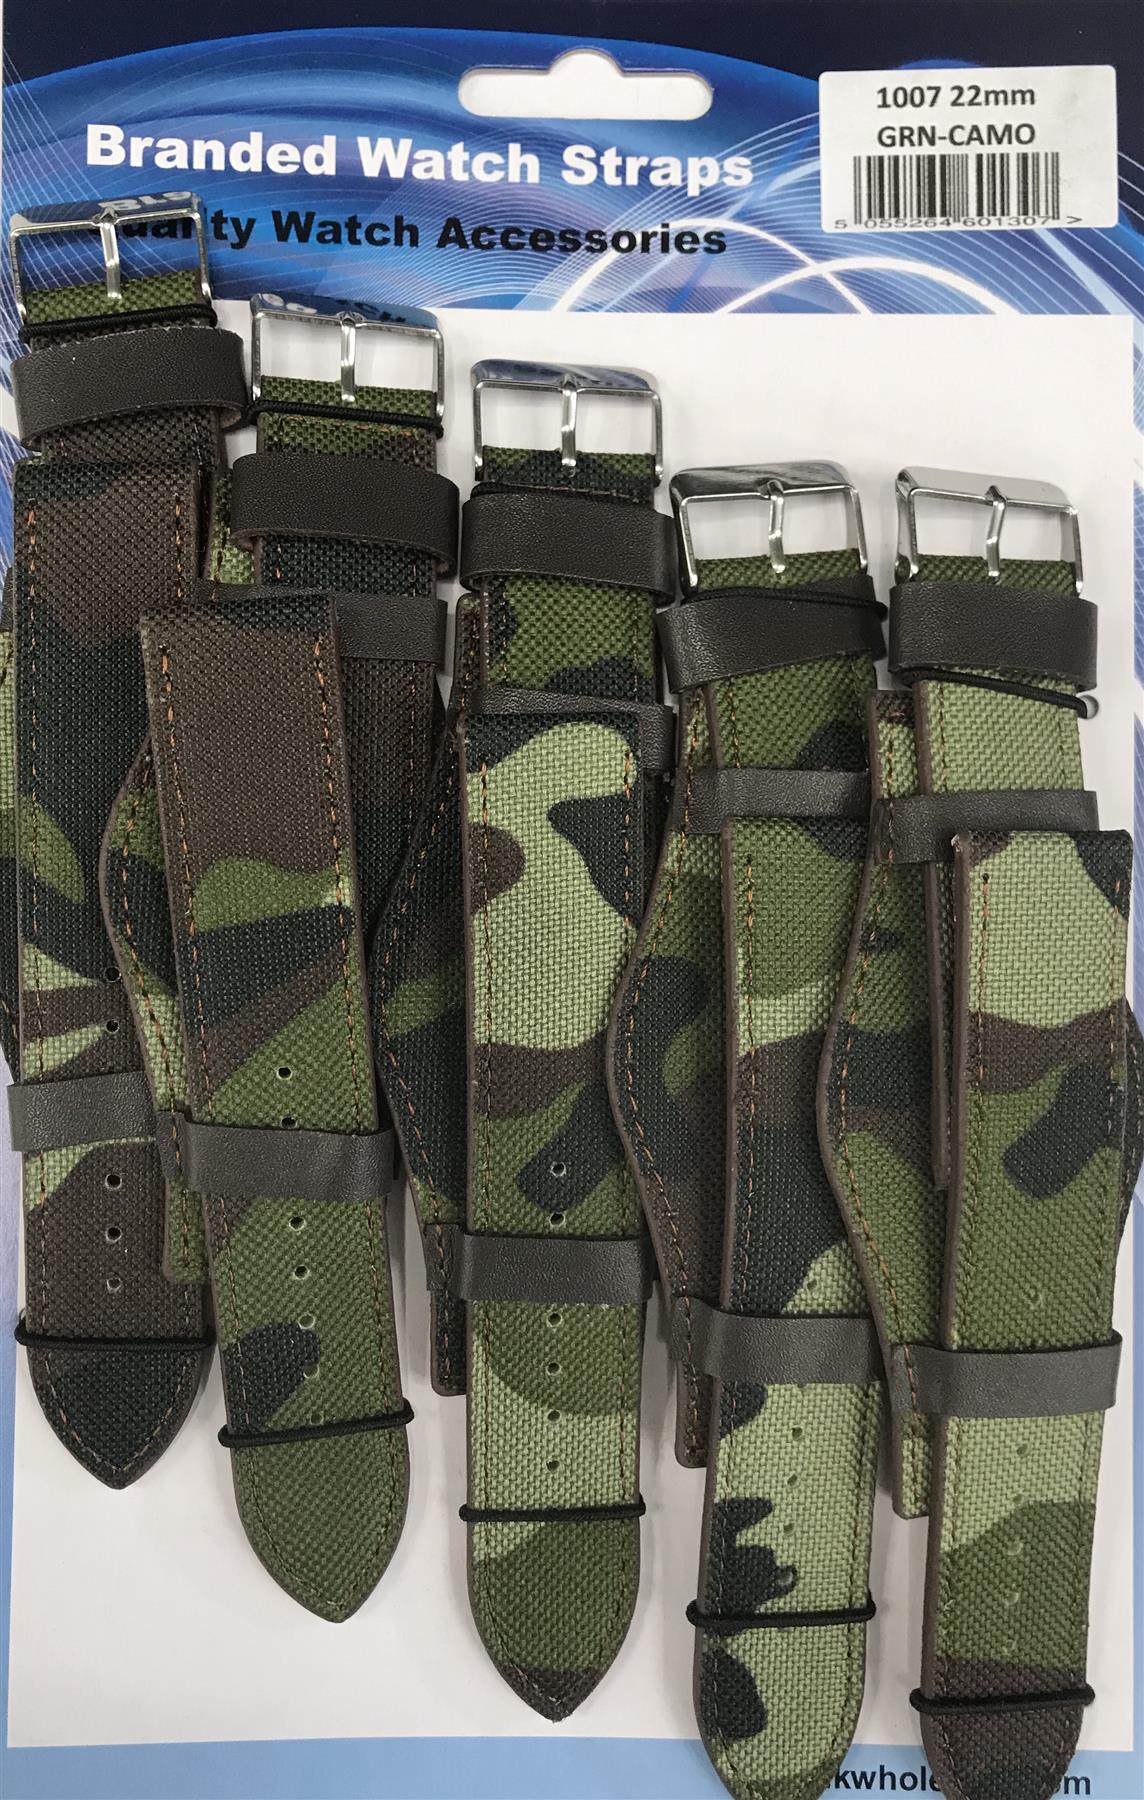 Leather Camo Green Military Watch Straps Pk5 22mm 1007GRN